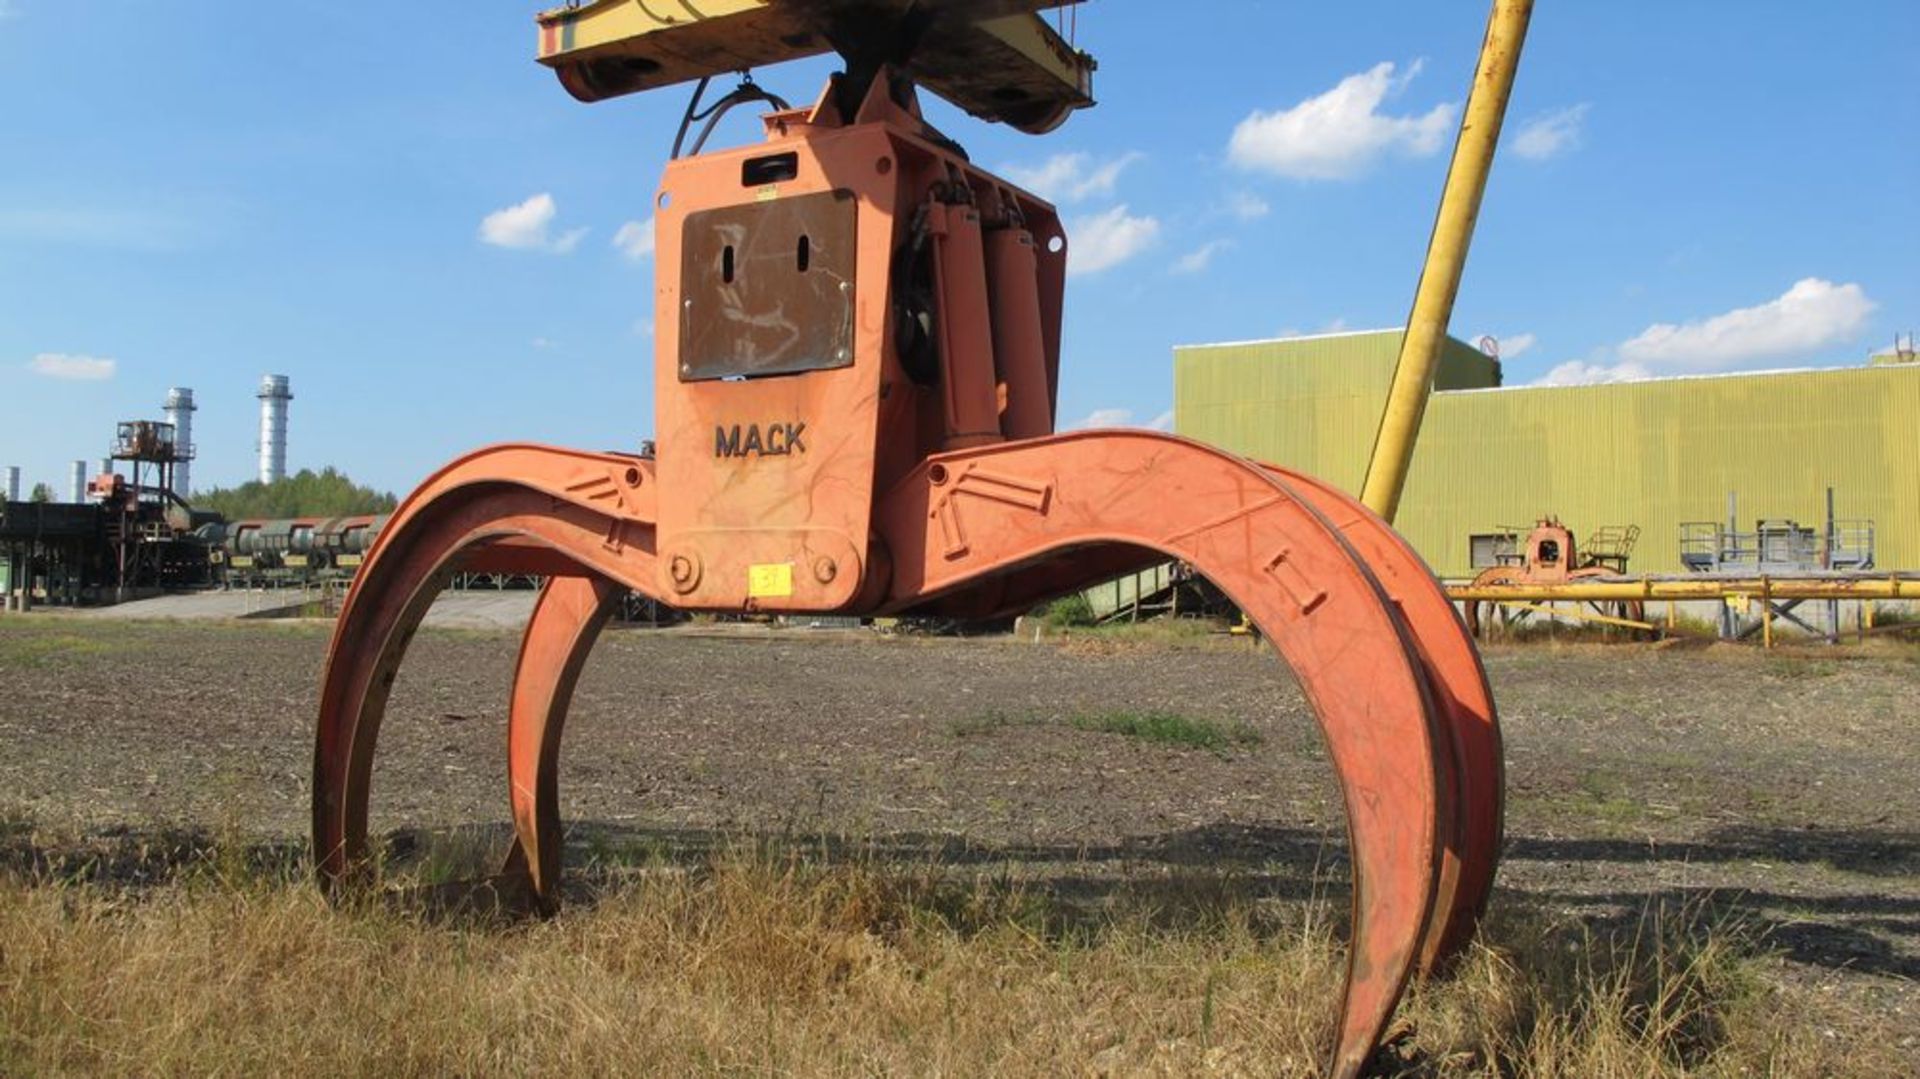 MACK HYDRAULIC GRAPPLE (ON CRANE), APPROX 12' - 16' TALL), (SPARE) APPROX 12' - 16' TALL (WOOD